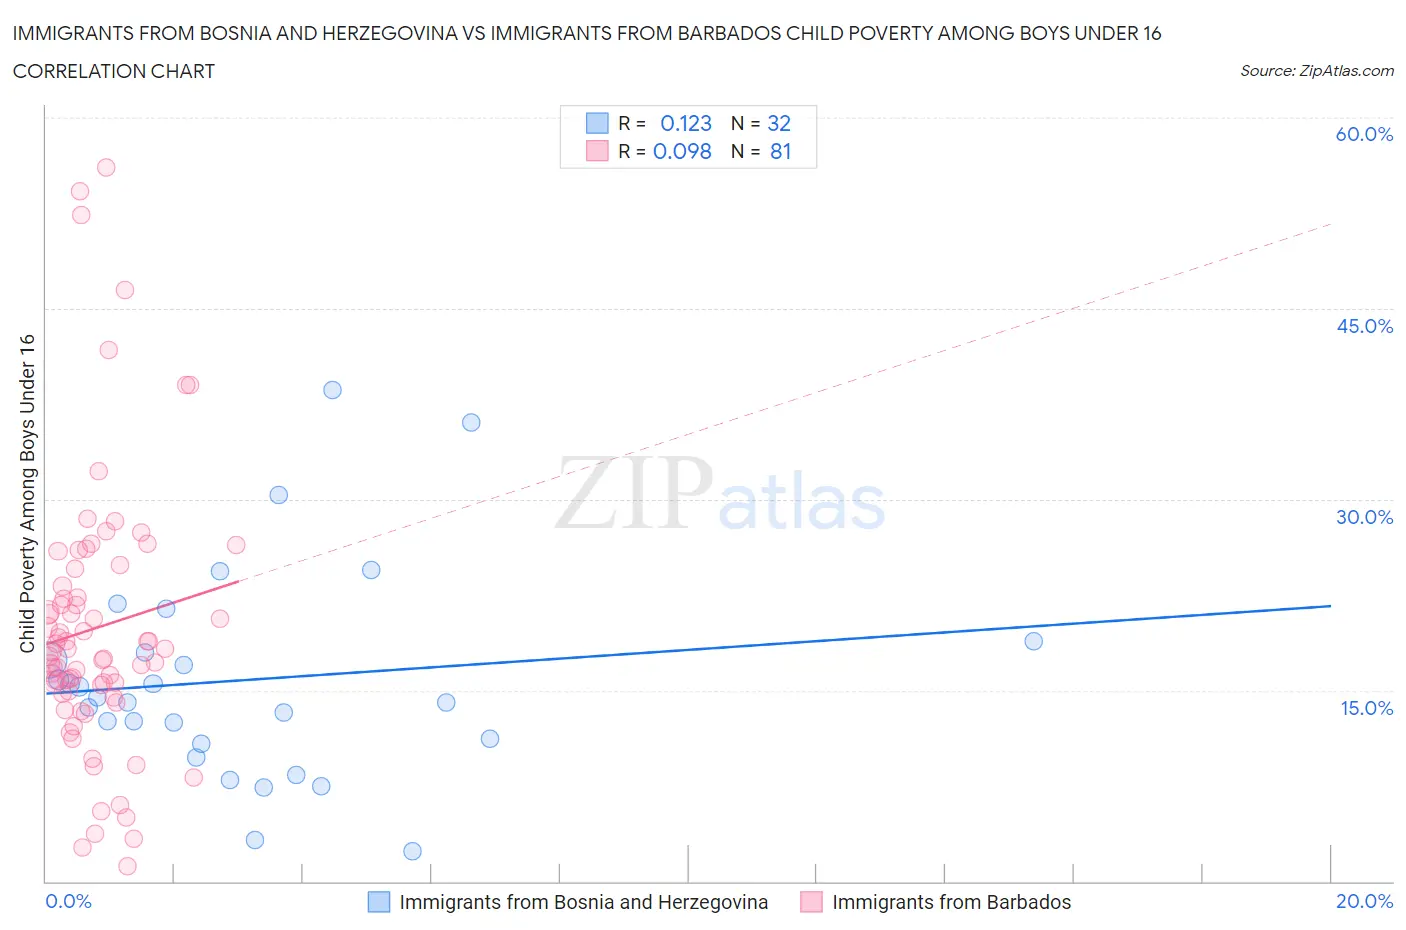 Immigrants from Bosnia and Herzegovina vs Immigrants from Barbados Child Poverty Among Boys Under 16